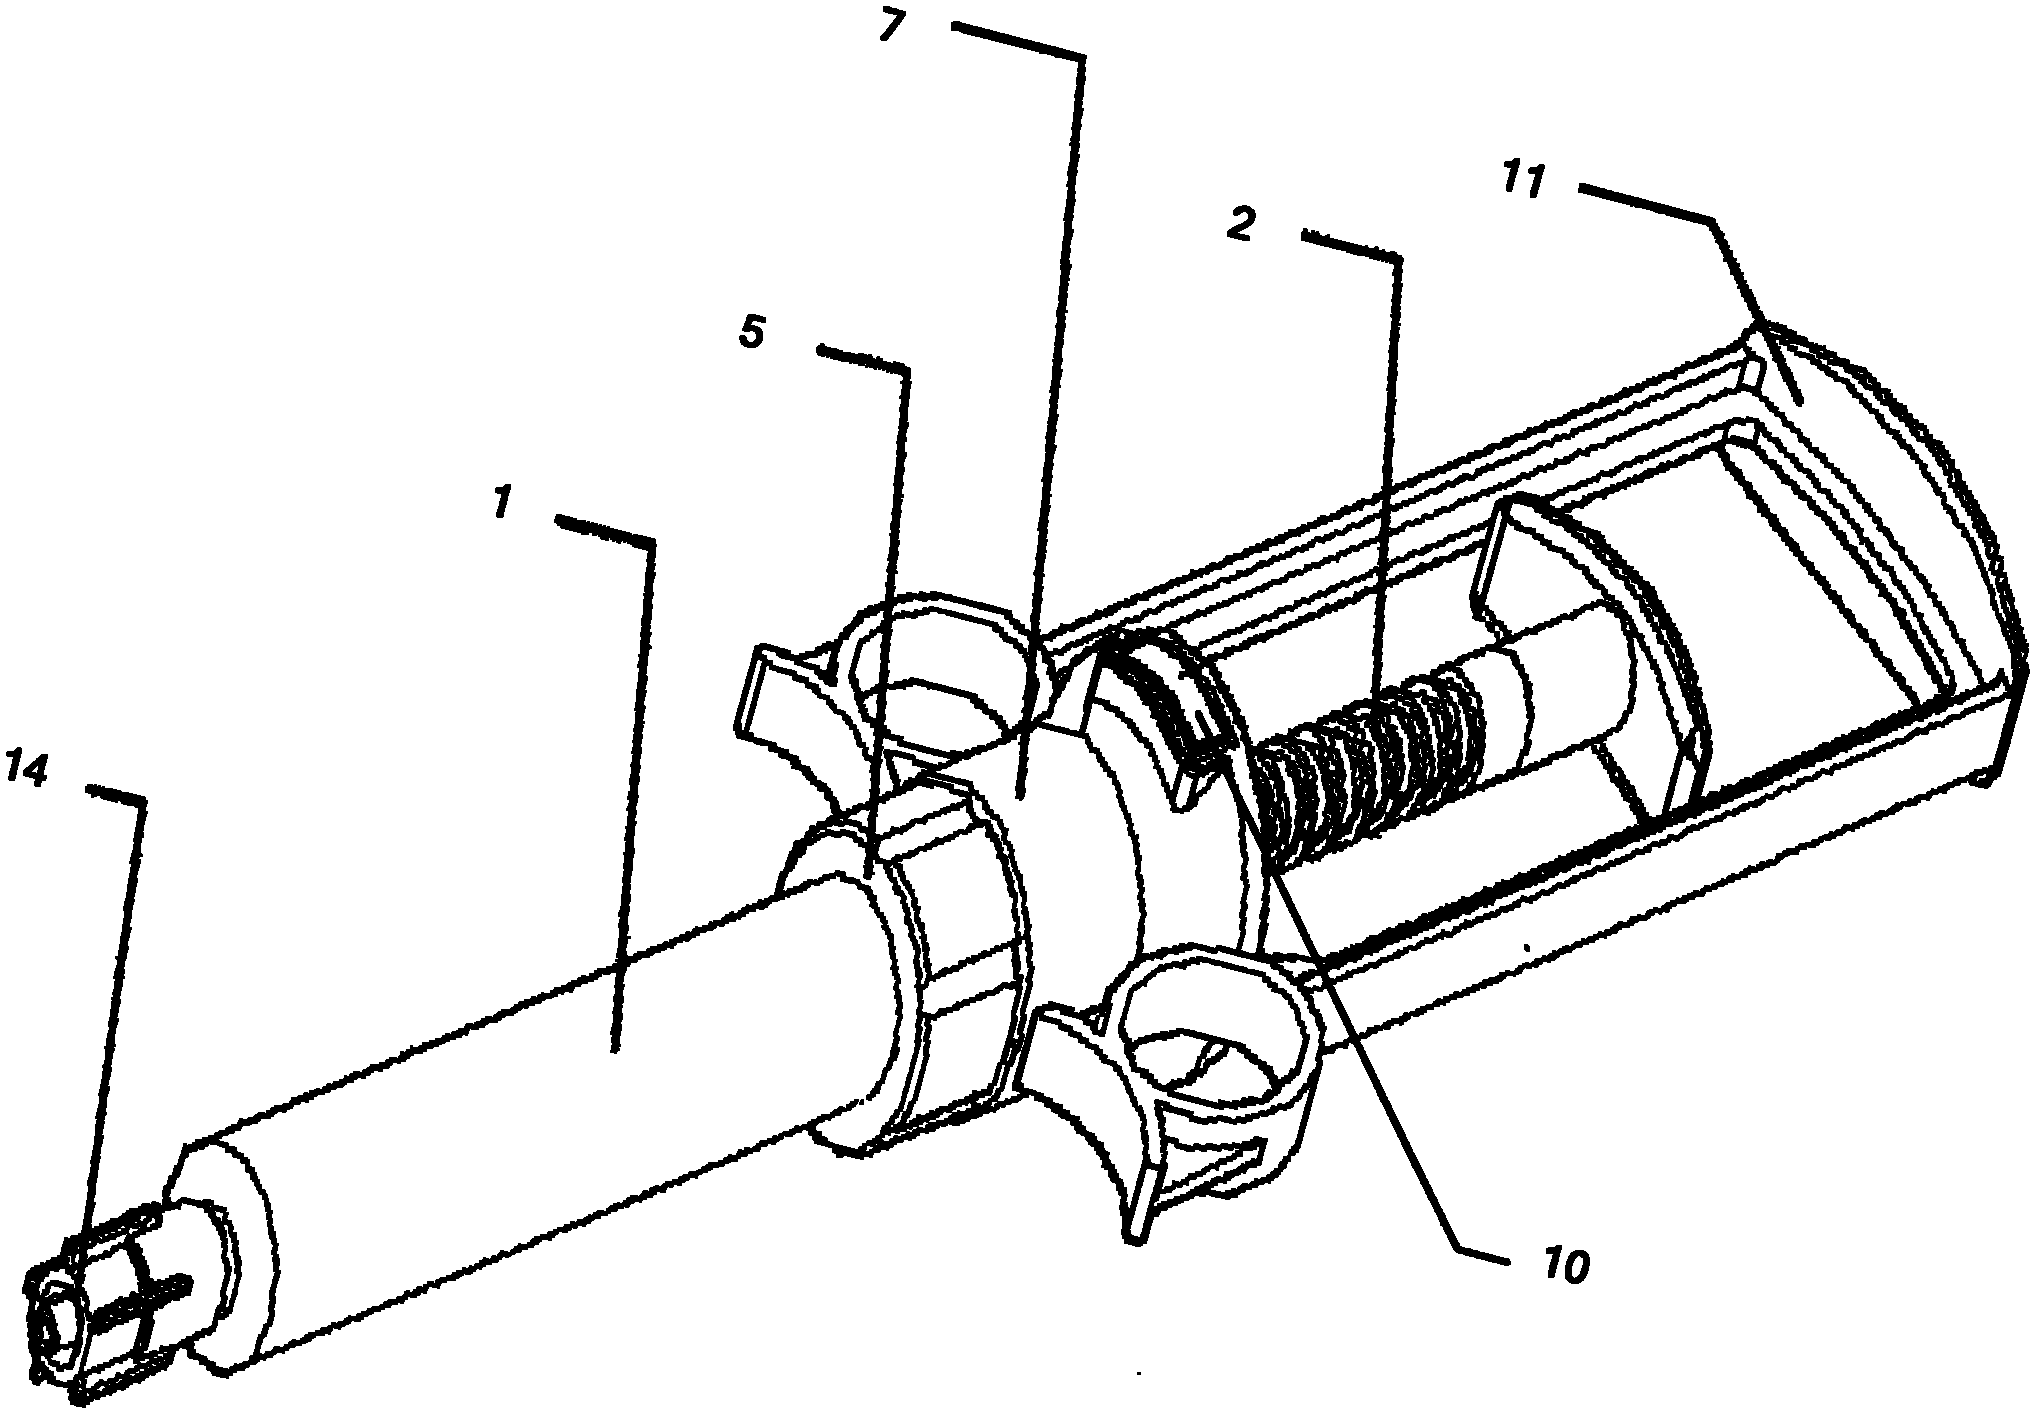 Power-assisted three-ring injection syringe